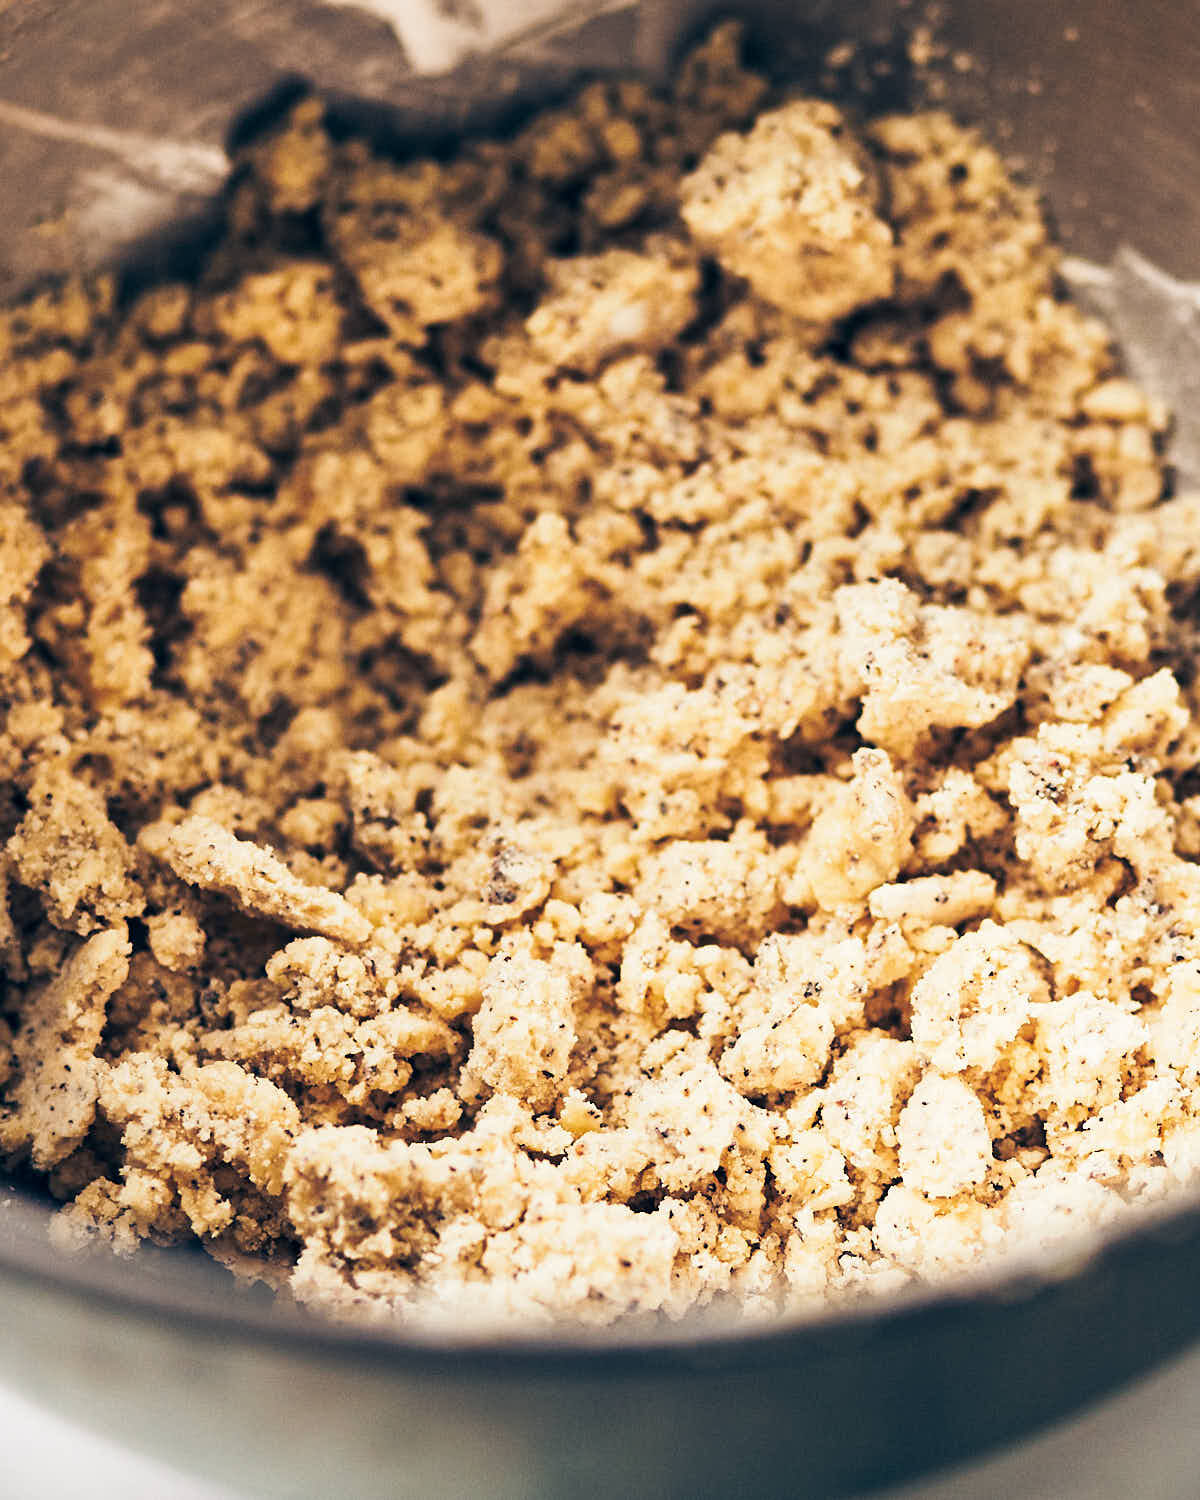 Crumbly dough for earl grey shortbread cookies in a mixing bowl.